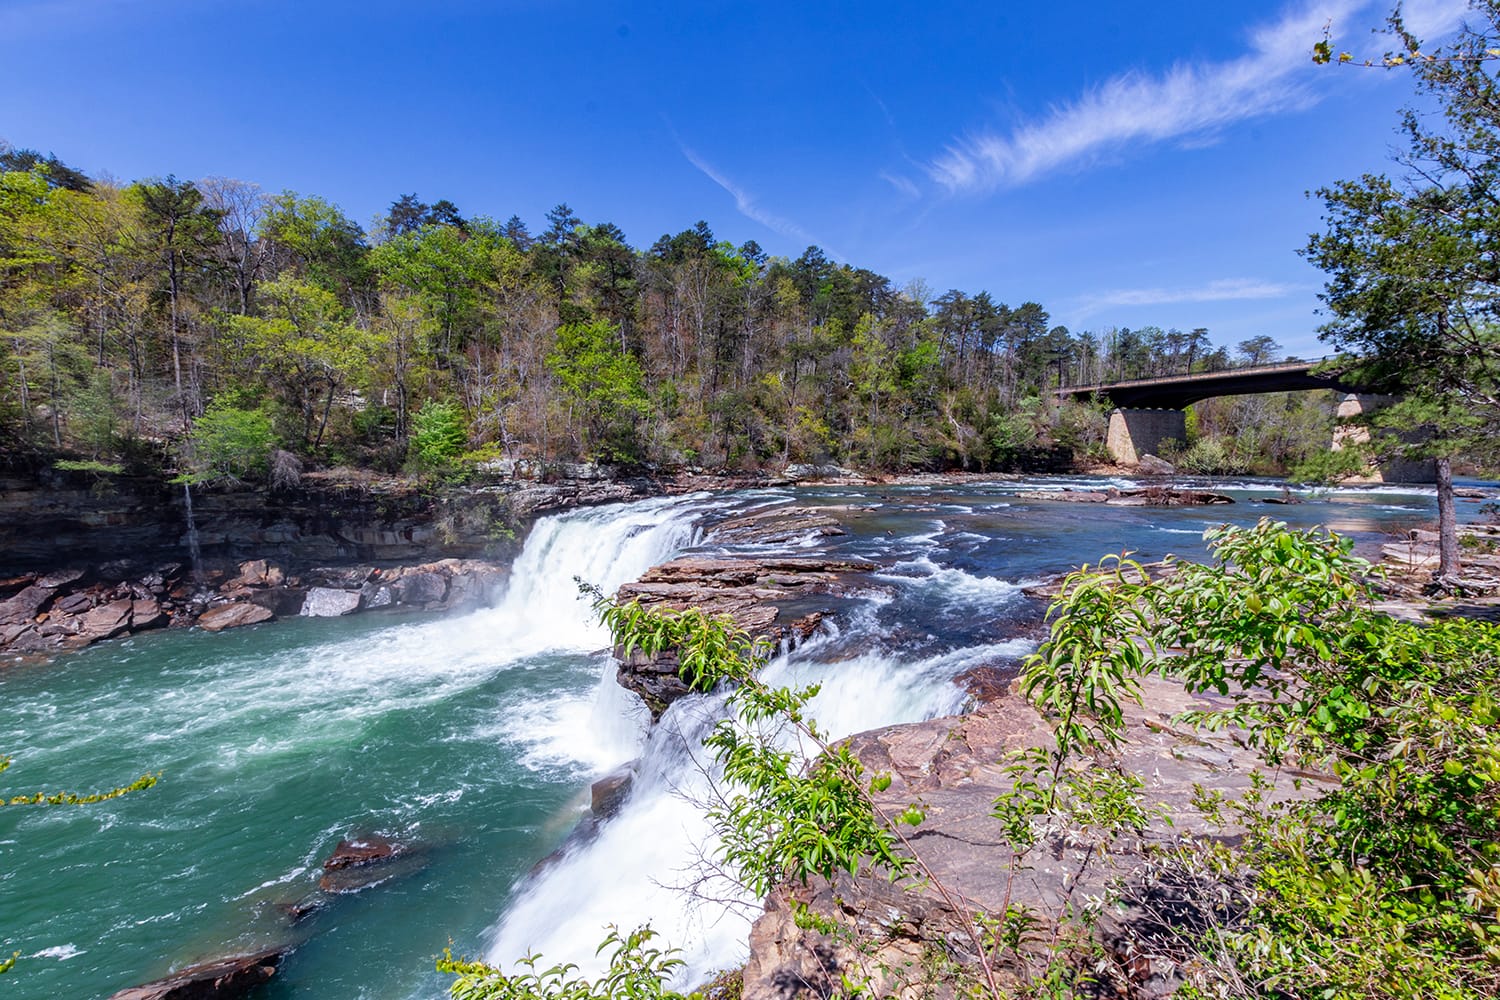 Little falls in Little River Canyon National Preserve, Alabama, USA